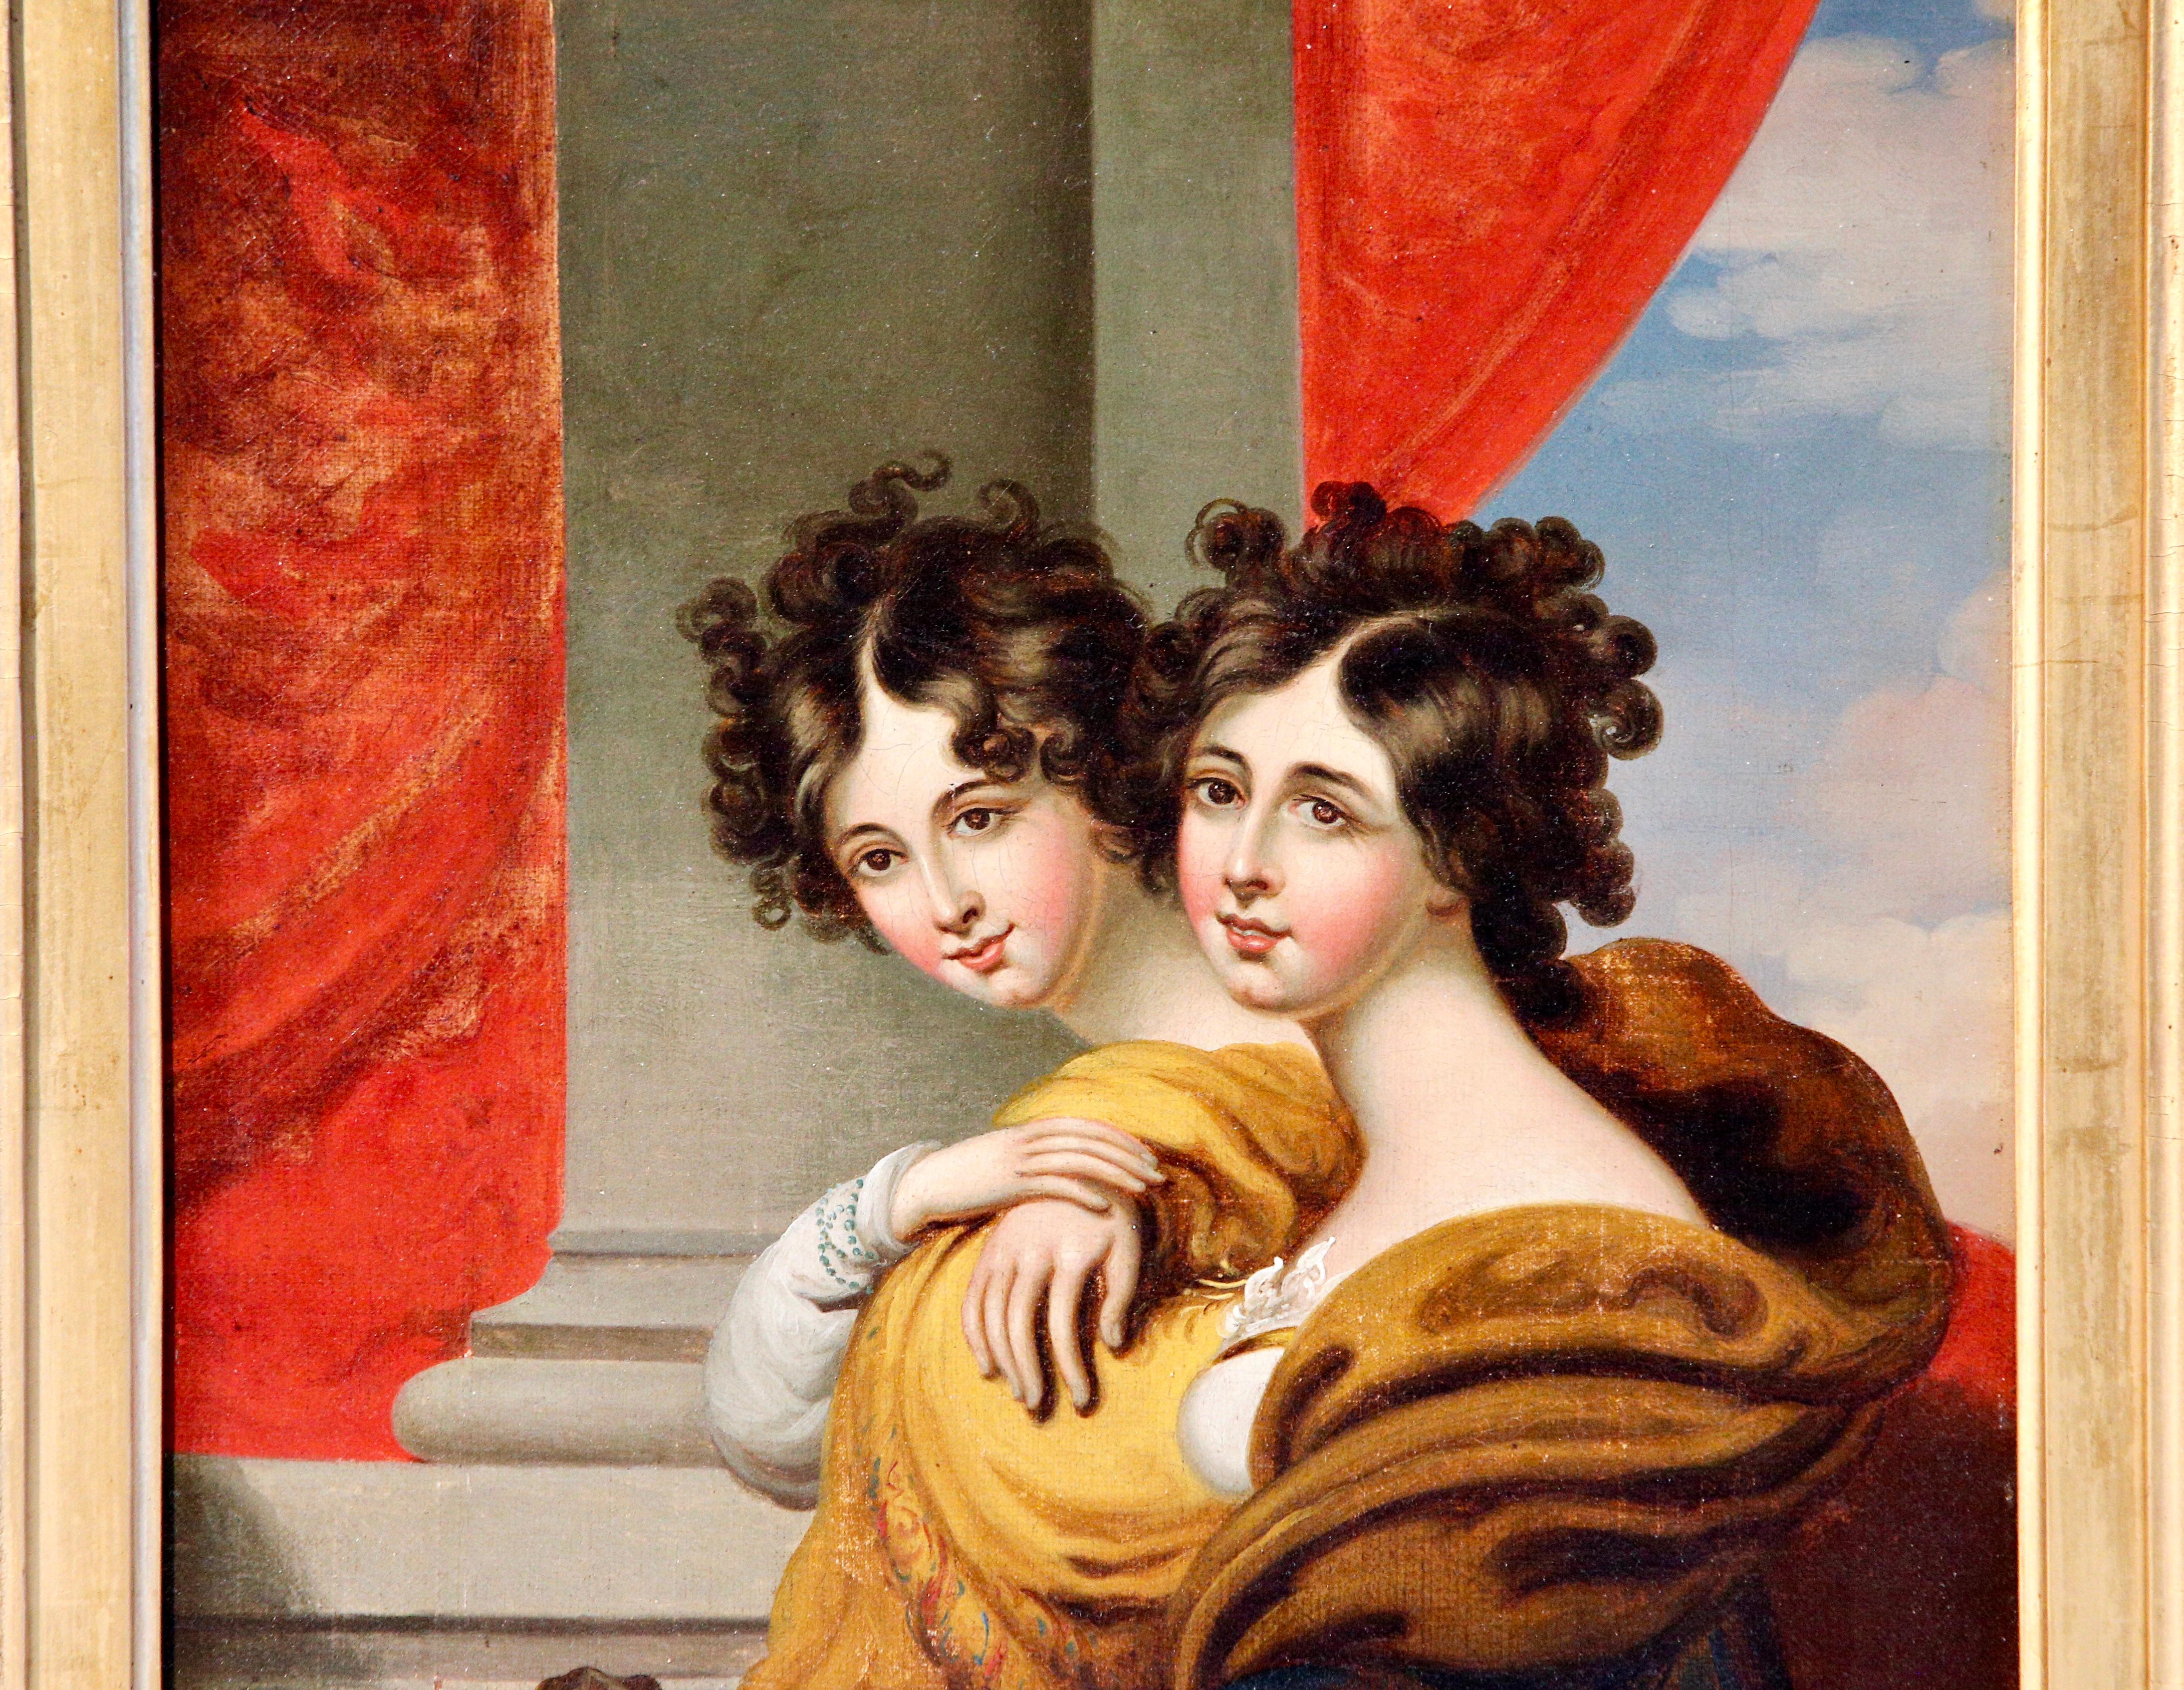 In the Manner of George Henry Harlow and George Chinnery two sisters, seated, half length, before a column, wearing shawls and red drapes. 
.
         
     